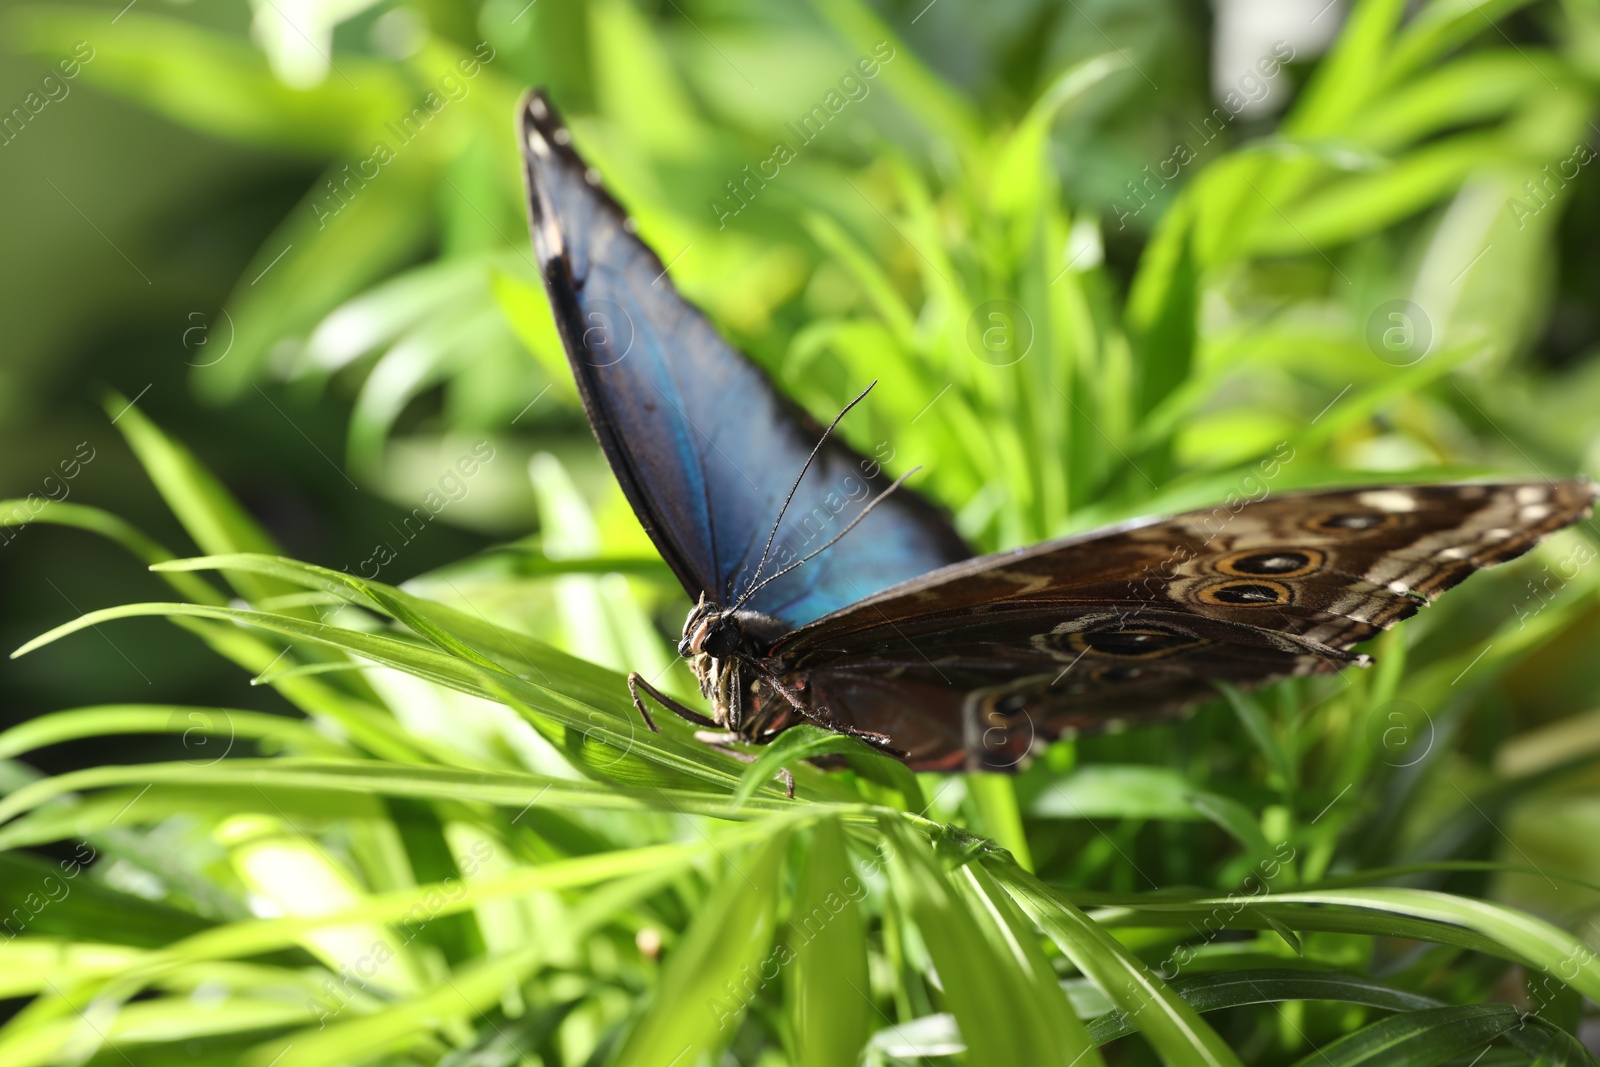 Photo of Beautiful common morpho butterfly on green plant in garden